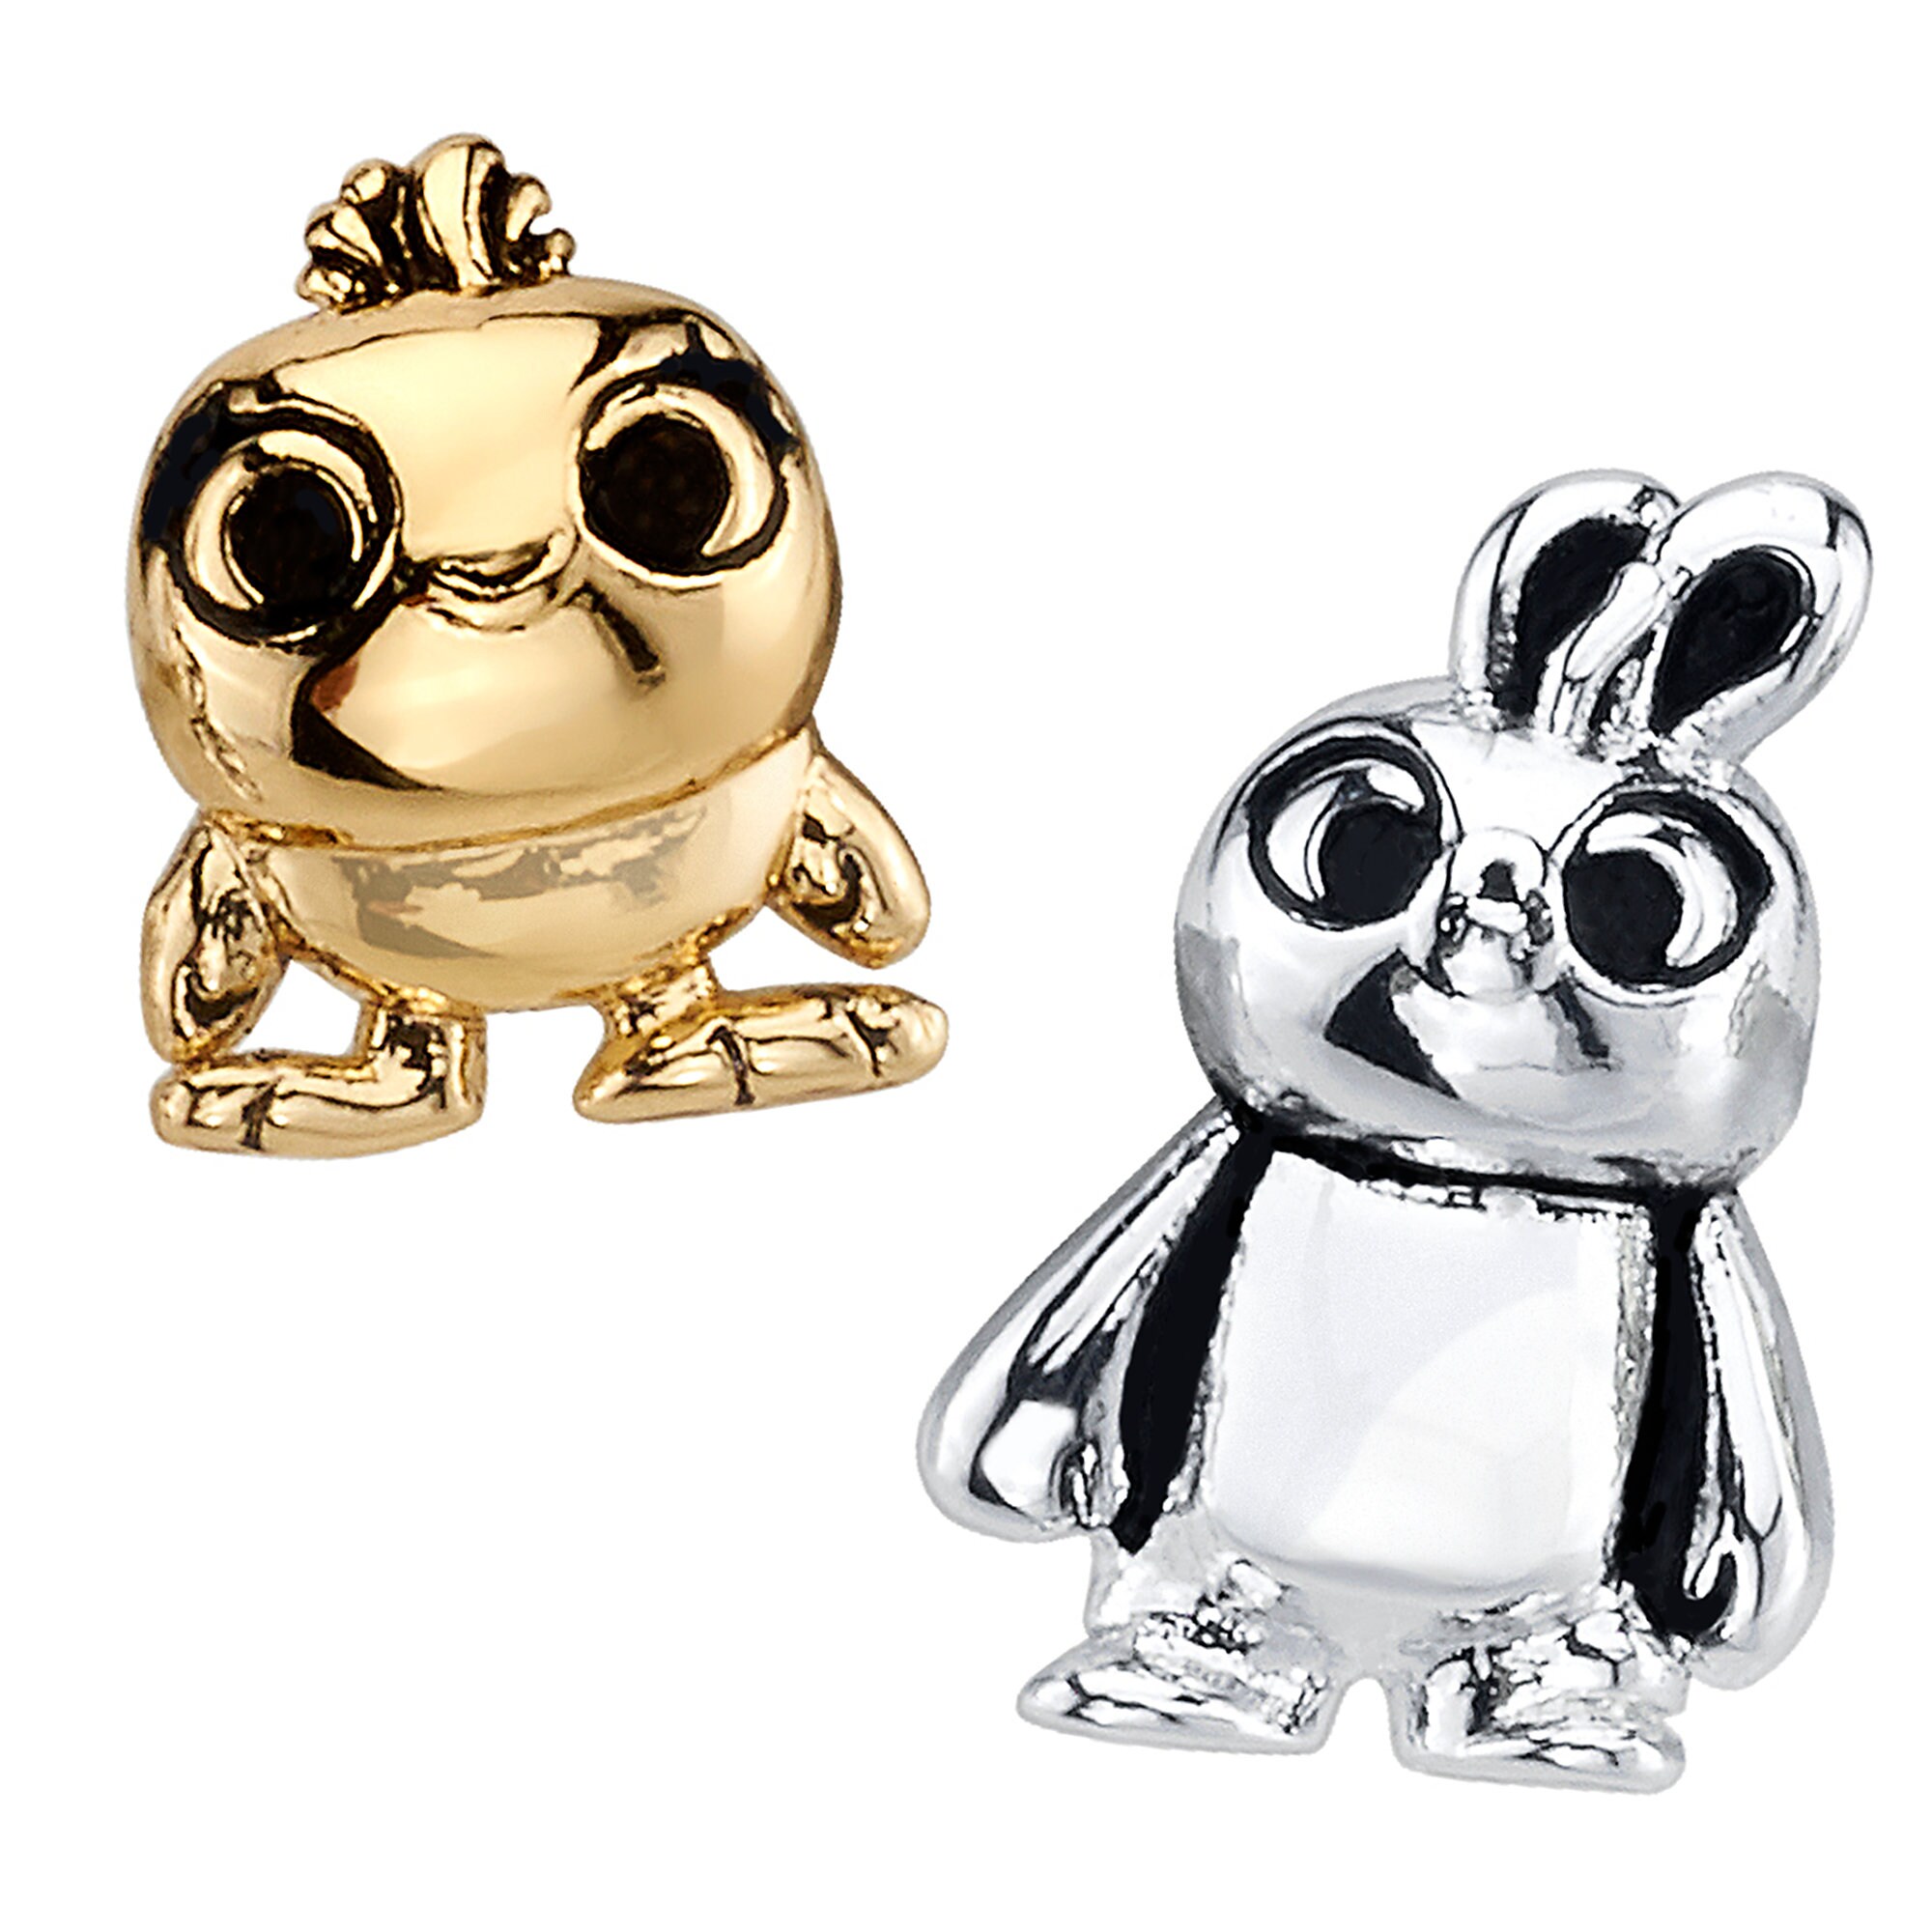 Ducky and Bunny Post Earrings - Toy Story 4